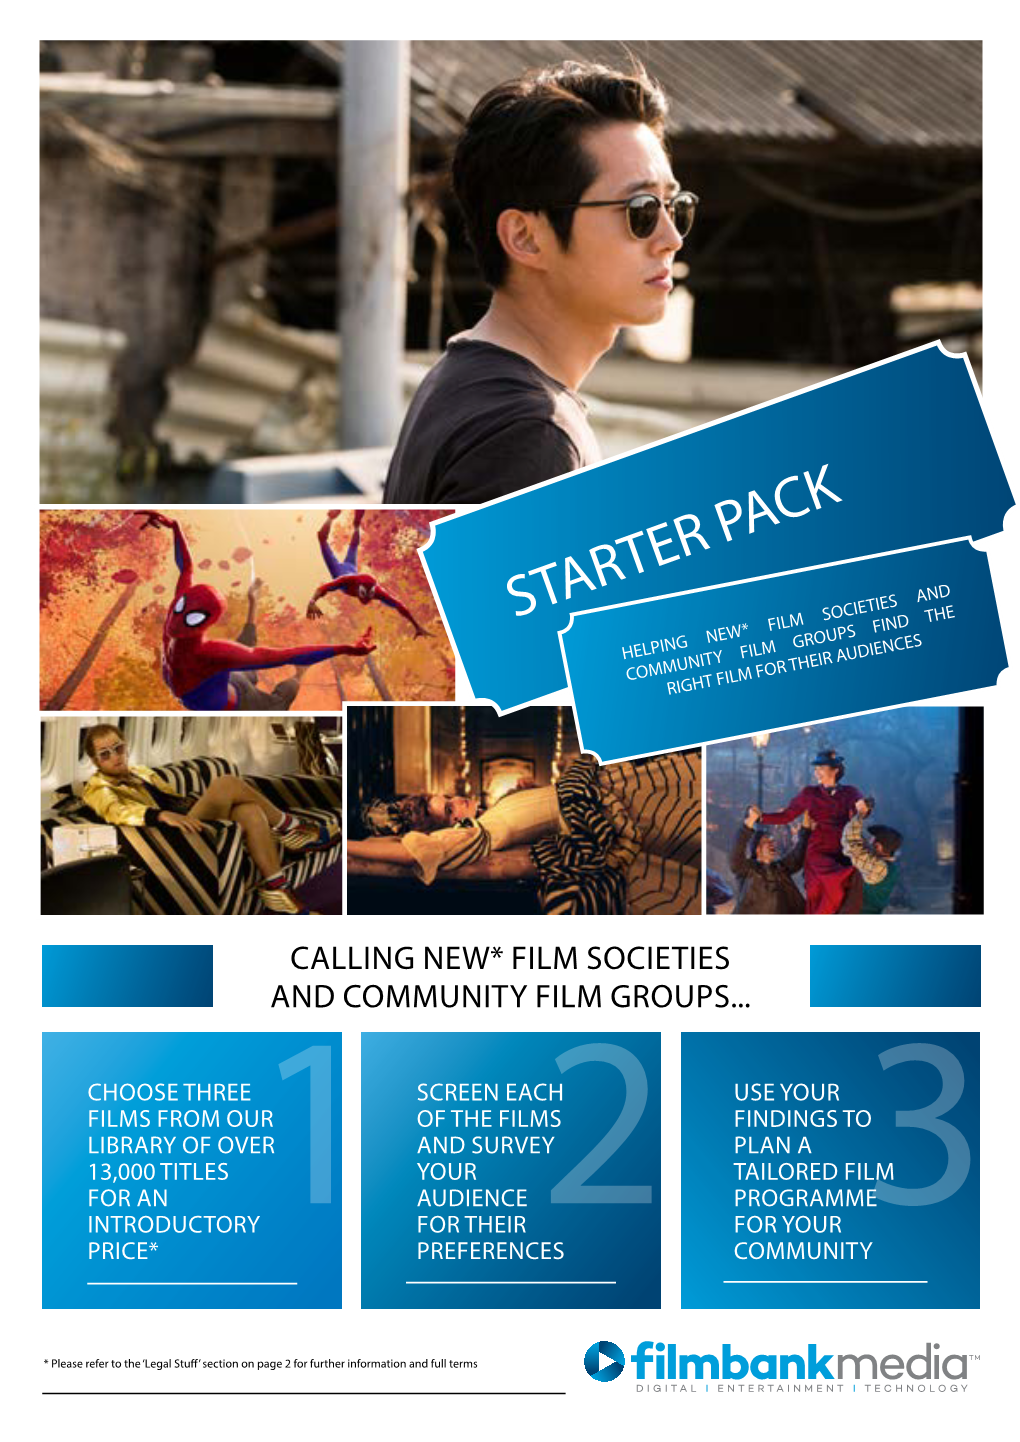 Starter Pack Helping New* Film Societies and Community Film Groups Find the Right Film for Their Audiences